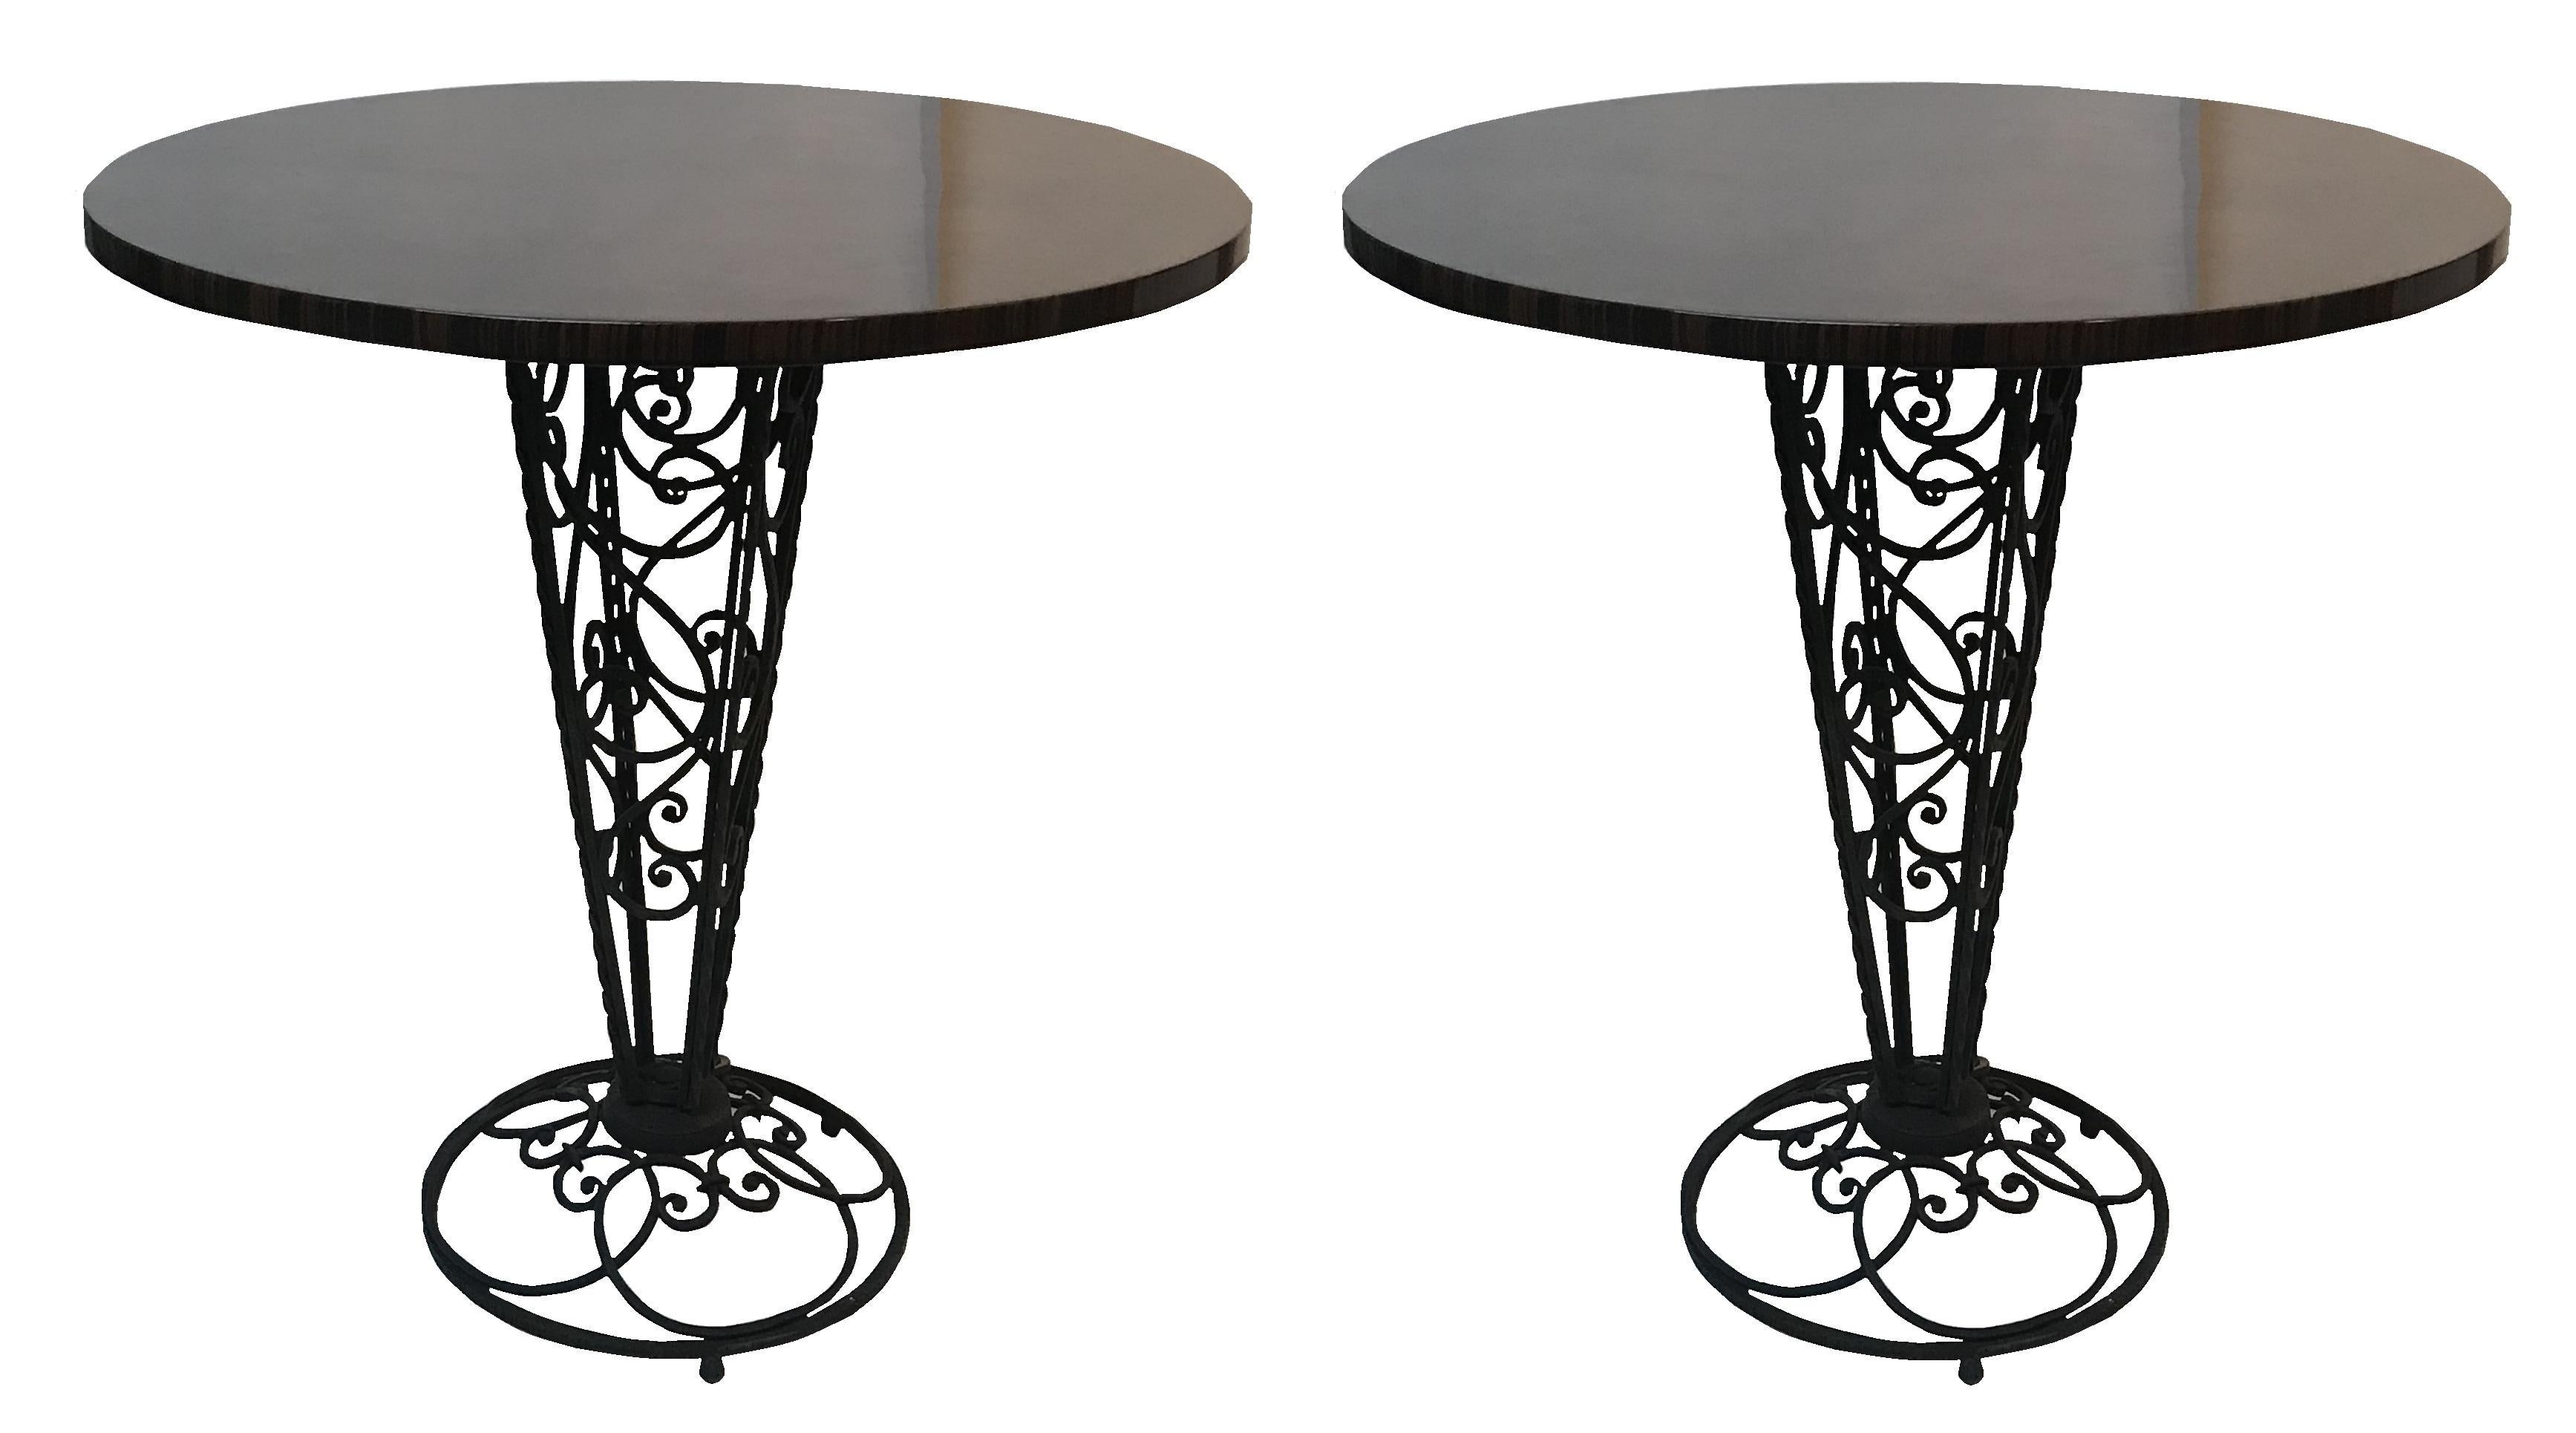 Two tables 
Material: wood and iron
Style: Art Deco
Country: France
If you want to live in the golden years, this is the tables that your project needs.
We have specialized in the sale of Art Deco and Art Nouveau and Vintage styles since 1982. If